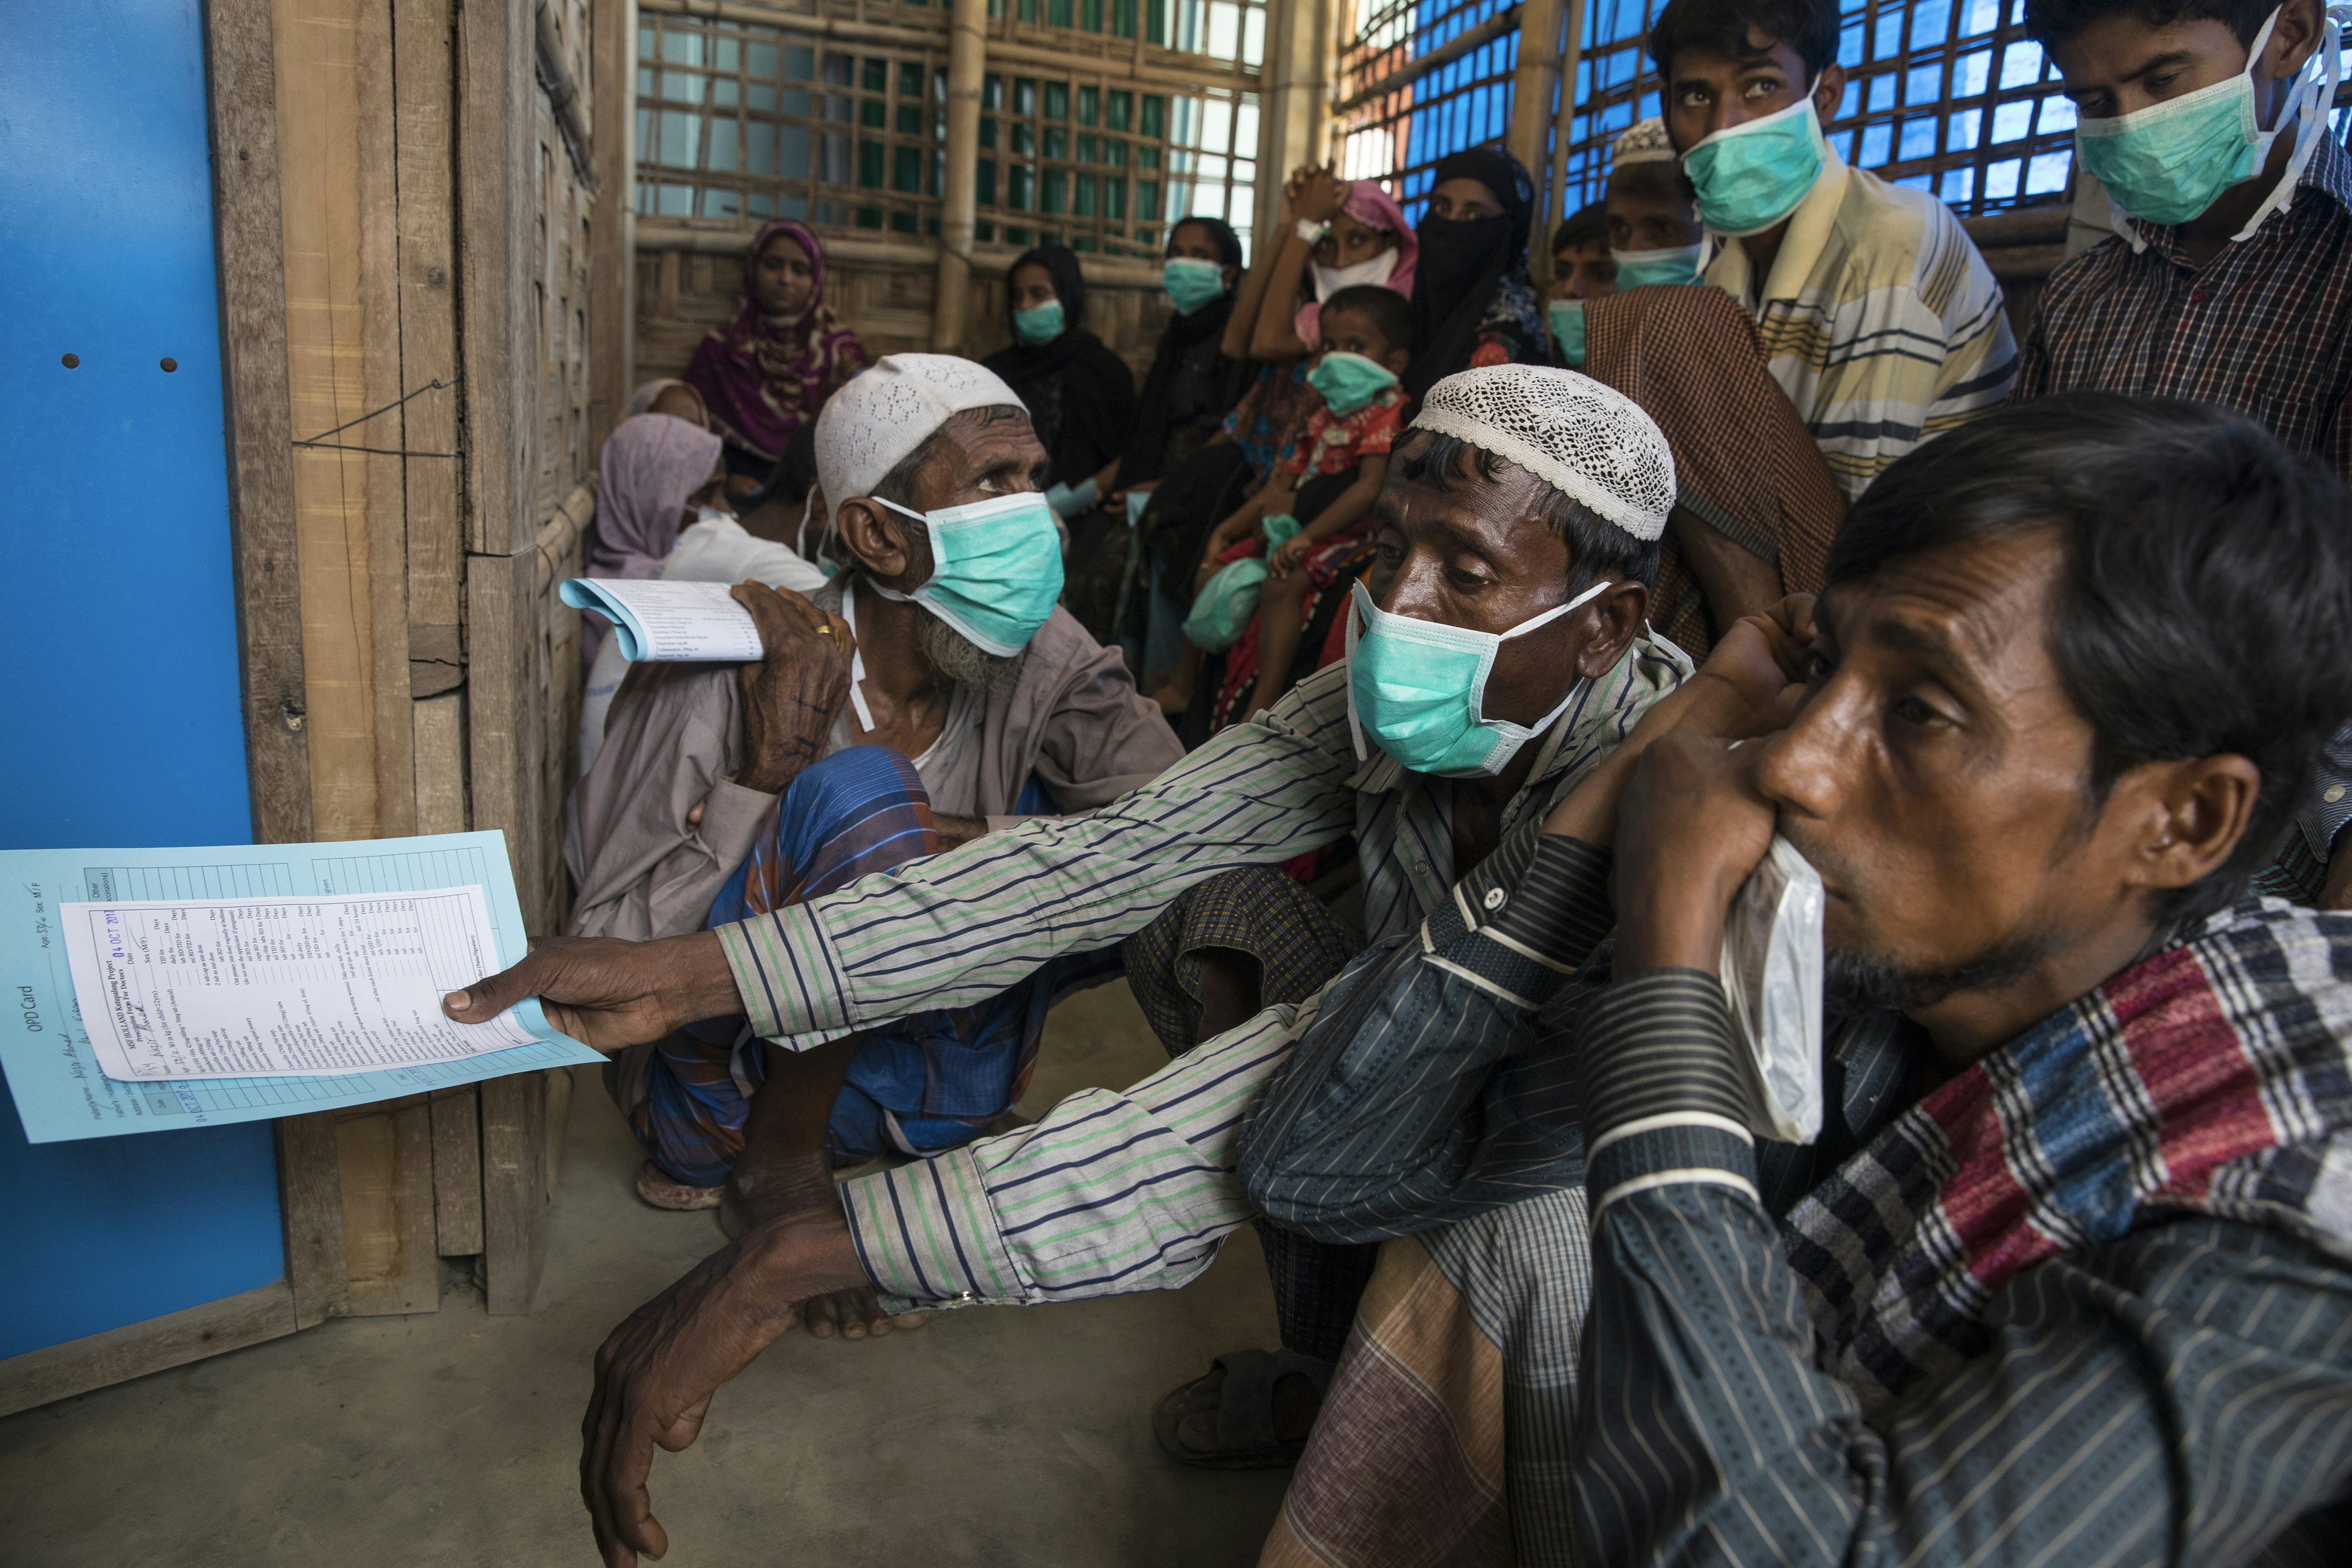 KUTUPALONG, BANGLADESH - OCTOBER 4: Patients wait for testing and medical treatment for tuberculosis at the 'Doctors Without Borders' Kutupalong clinic on October 4, 2017 in Cox's Bazar, Bangladesh. Doctors Without Borders has been providing comprehensive basic healthcare services at their Kutupalong clinic since 2009. Due to the current Rohingya crisis, the clinic has expanded it's inpatient capacity dealing with approximately 2,500 out patient treatments and around 1,000 emergency room patients per week. All healthcare services provided at the clinic are free of charge to both the Rohingya refugee population as well as local Bangladeshi patients. Doctors Without Borders has also set up a number of health posts, mobile clinics and water and sanitation services elsewhere in Cox's Bazar to better respond to the influx. Well over a half a million Rohingya refugees have fled into Bangladesh since late August during the outbreak of violence in Rakhine state causing a humanitarian crisis in the region with continued challenges for aid agencies. (Photo by Paula Bronstein/Getty Images)